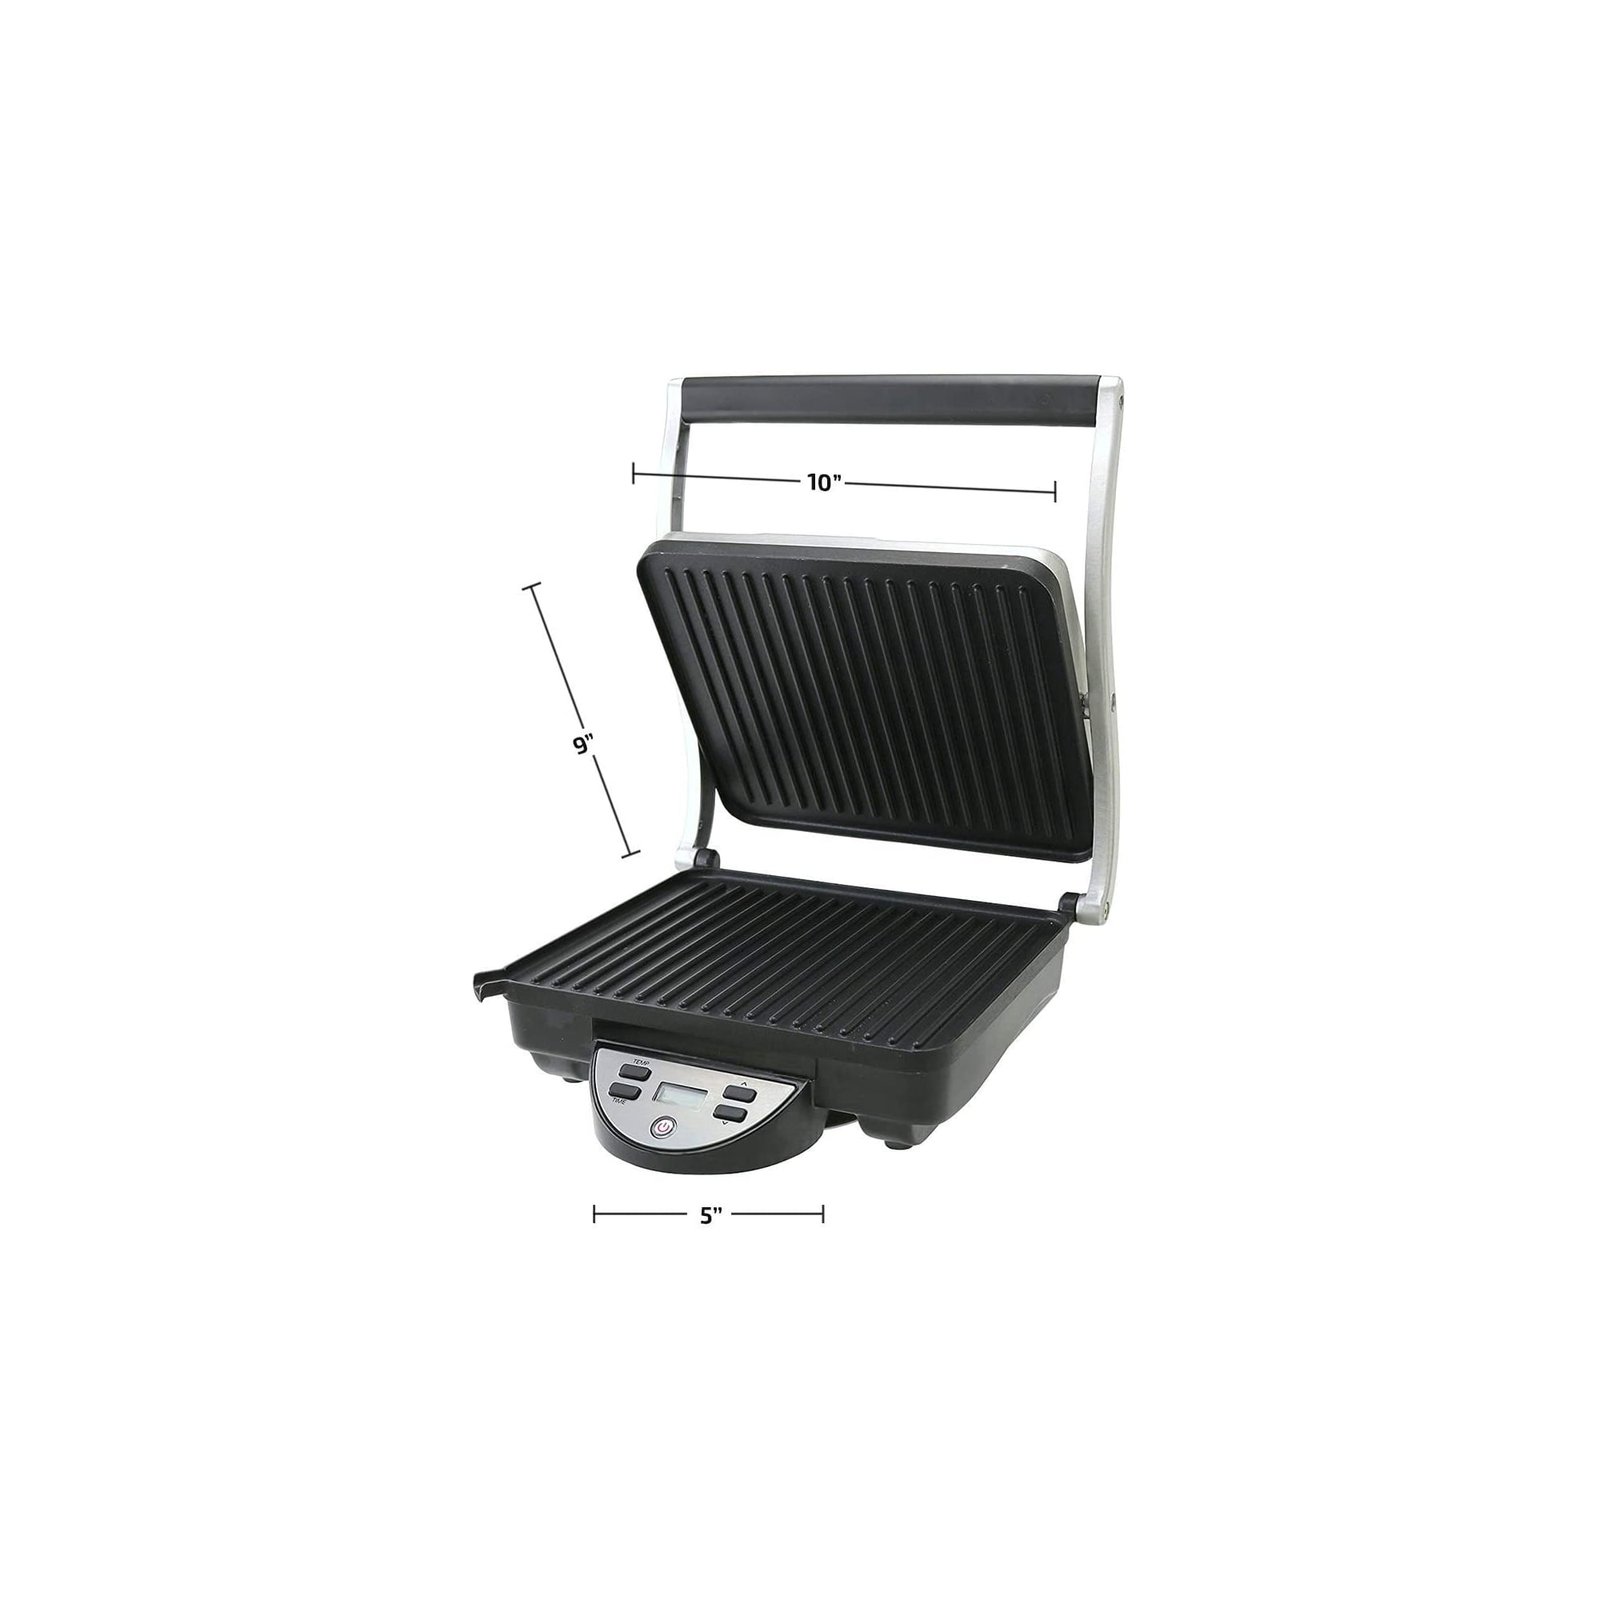 https://themarketdepot.com/wp-content/uploads/2023/01/Ovente-4-Sandwich-Electric-Indoor-Panini-Press-Grill-with-Non-Stick-Double-Flat-Cast-Iron-Cooking-Plates-5.jpeg